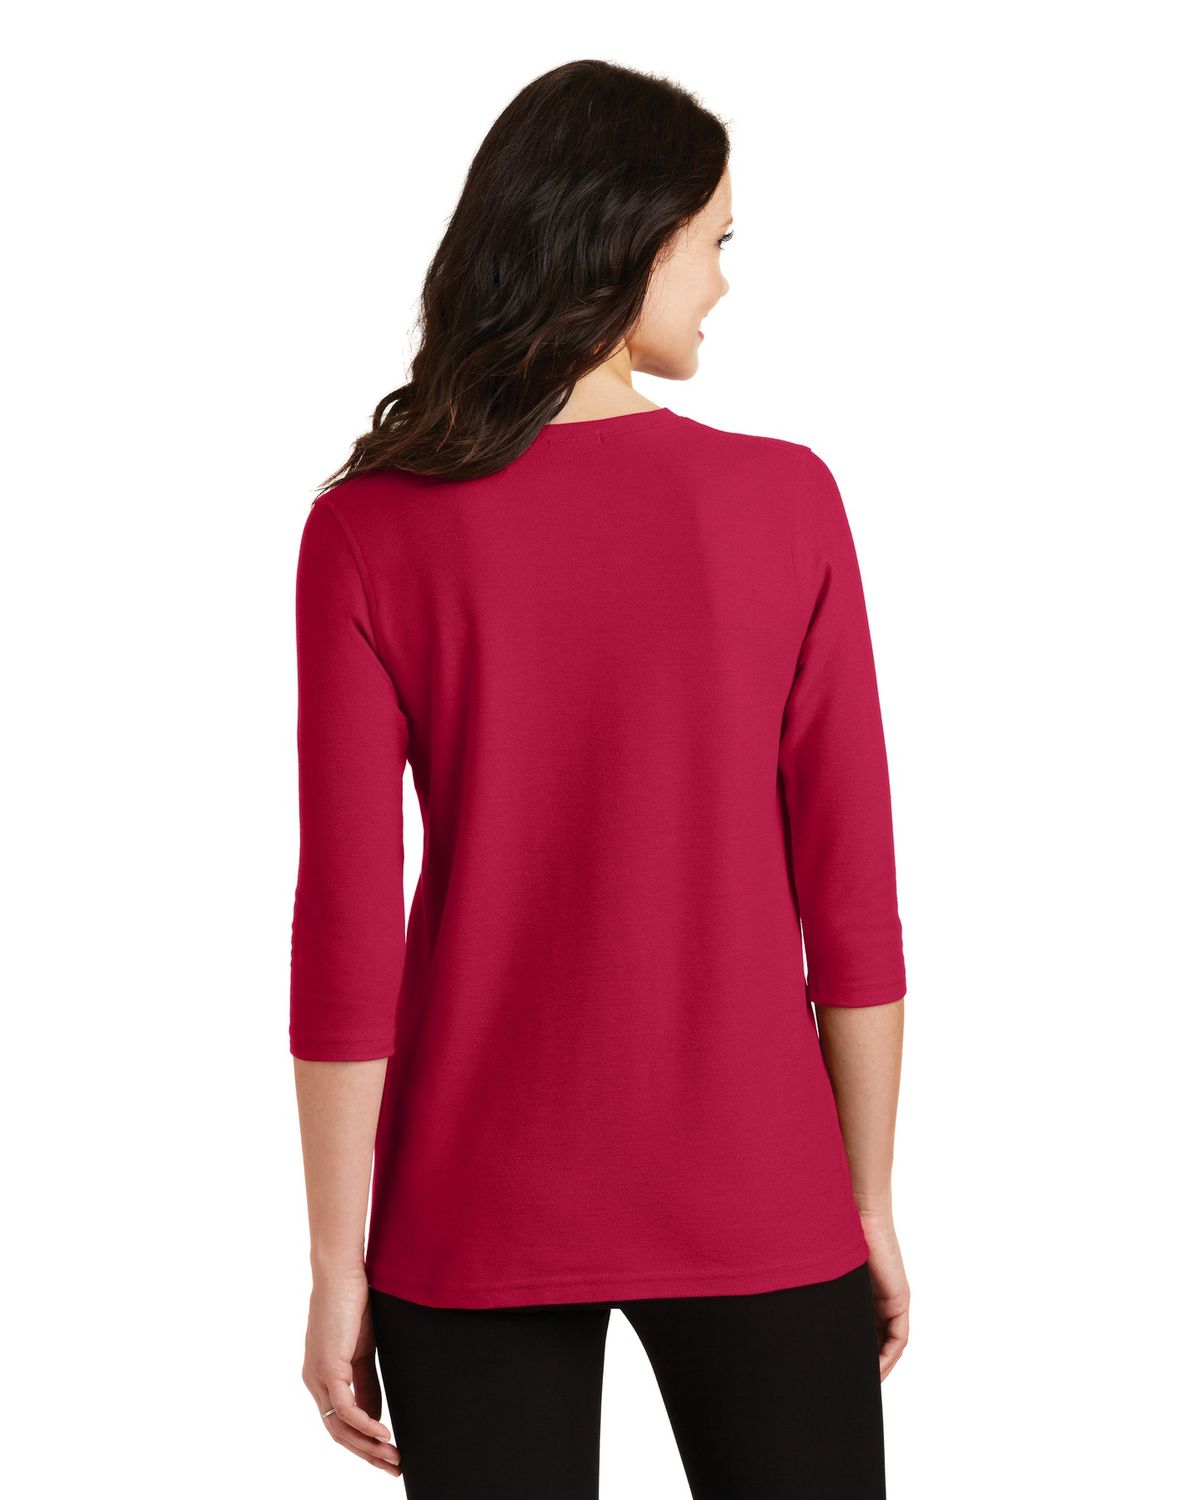 'Port Authority L561M Ladies Silk Touch Maternity 3/4-Sleeve V-Neck Shirt'